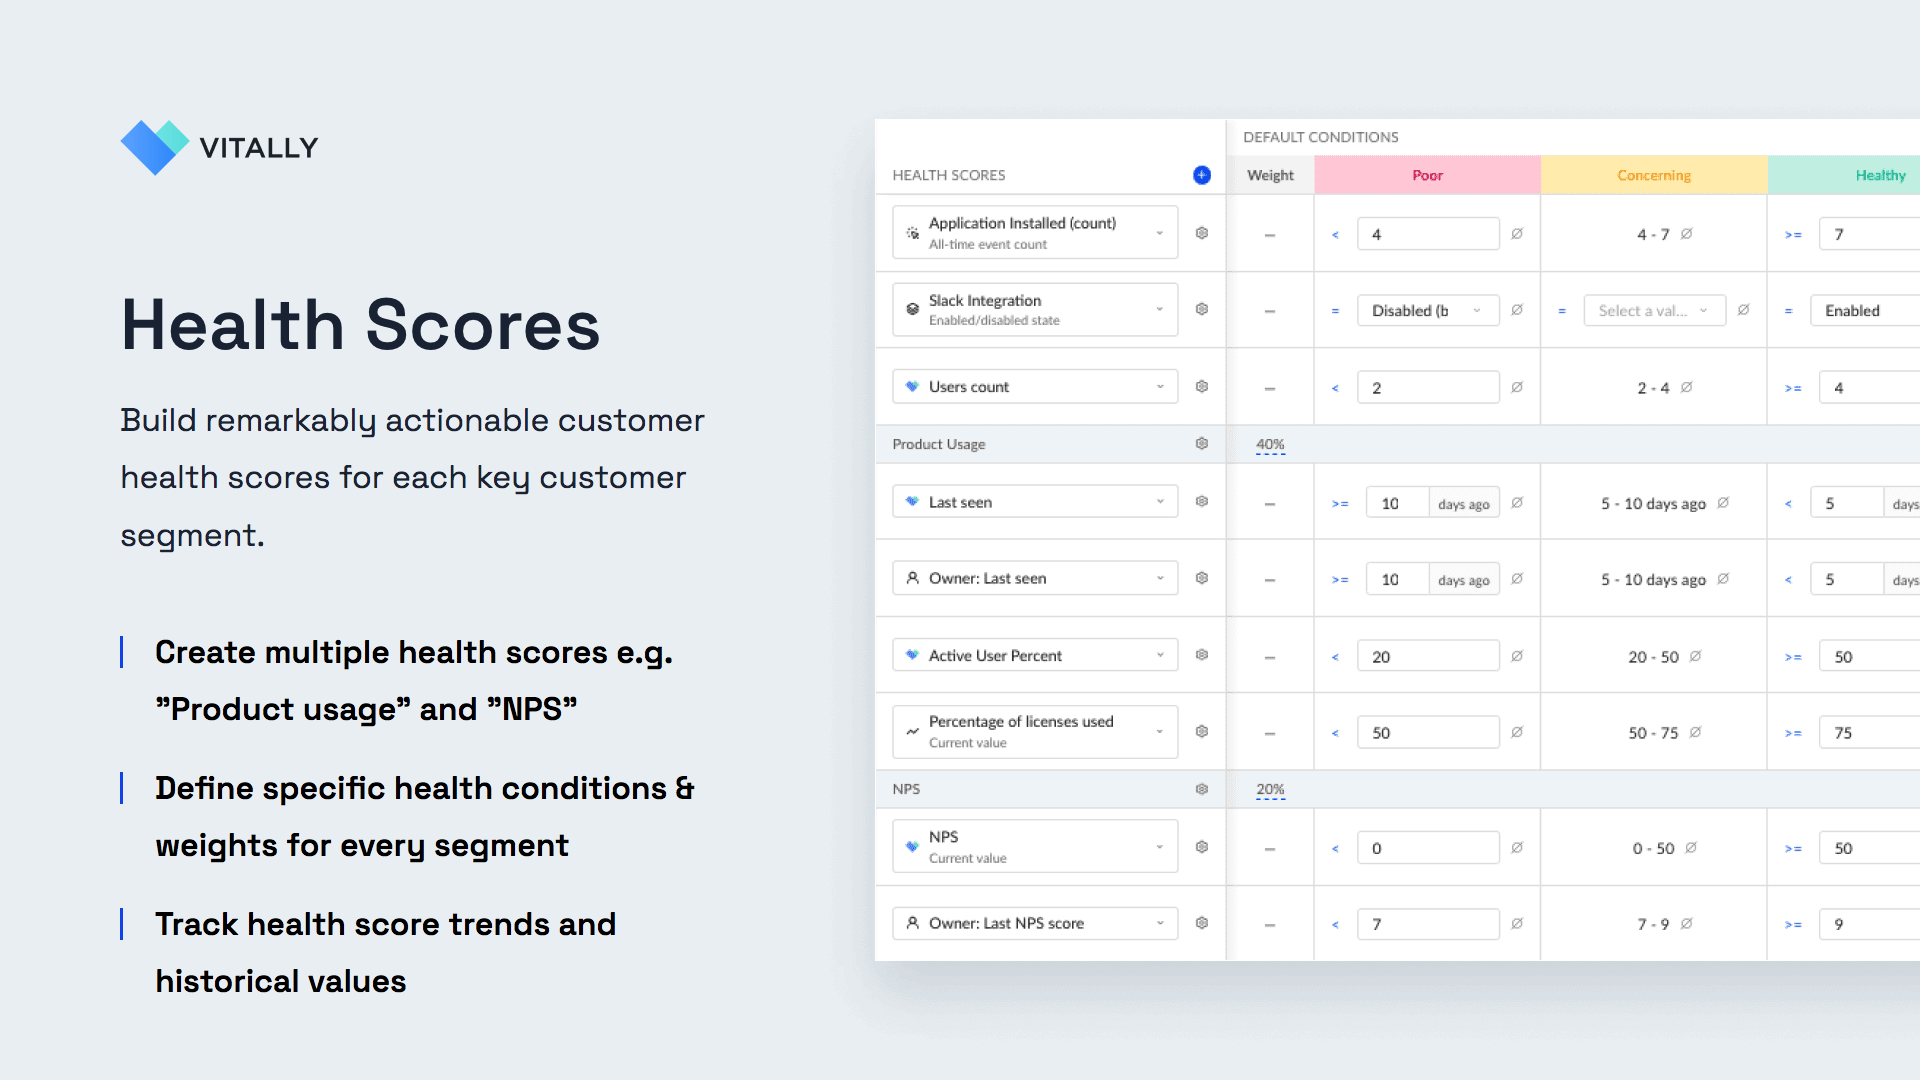 Health Scores -- Build remarkably actionable customer health scores for each key customer segment. Define specific health conditions & weights for every segment. Track health score trends and historical values.